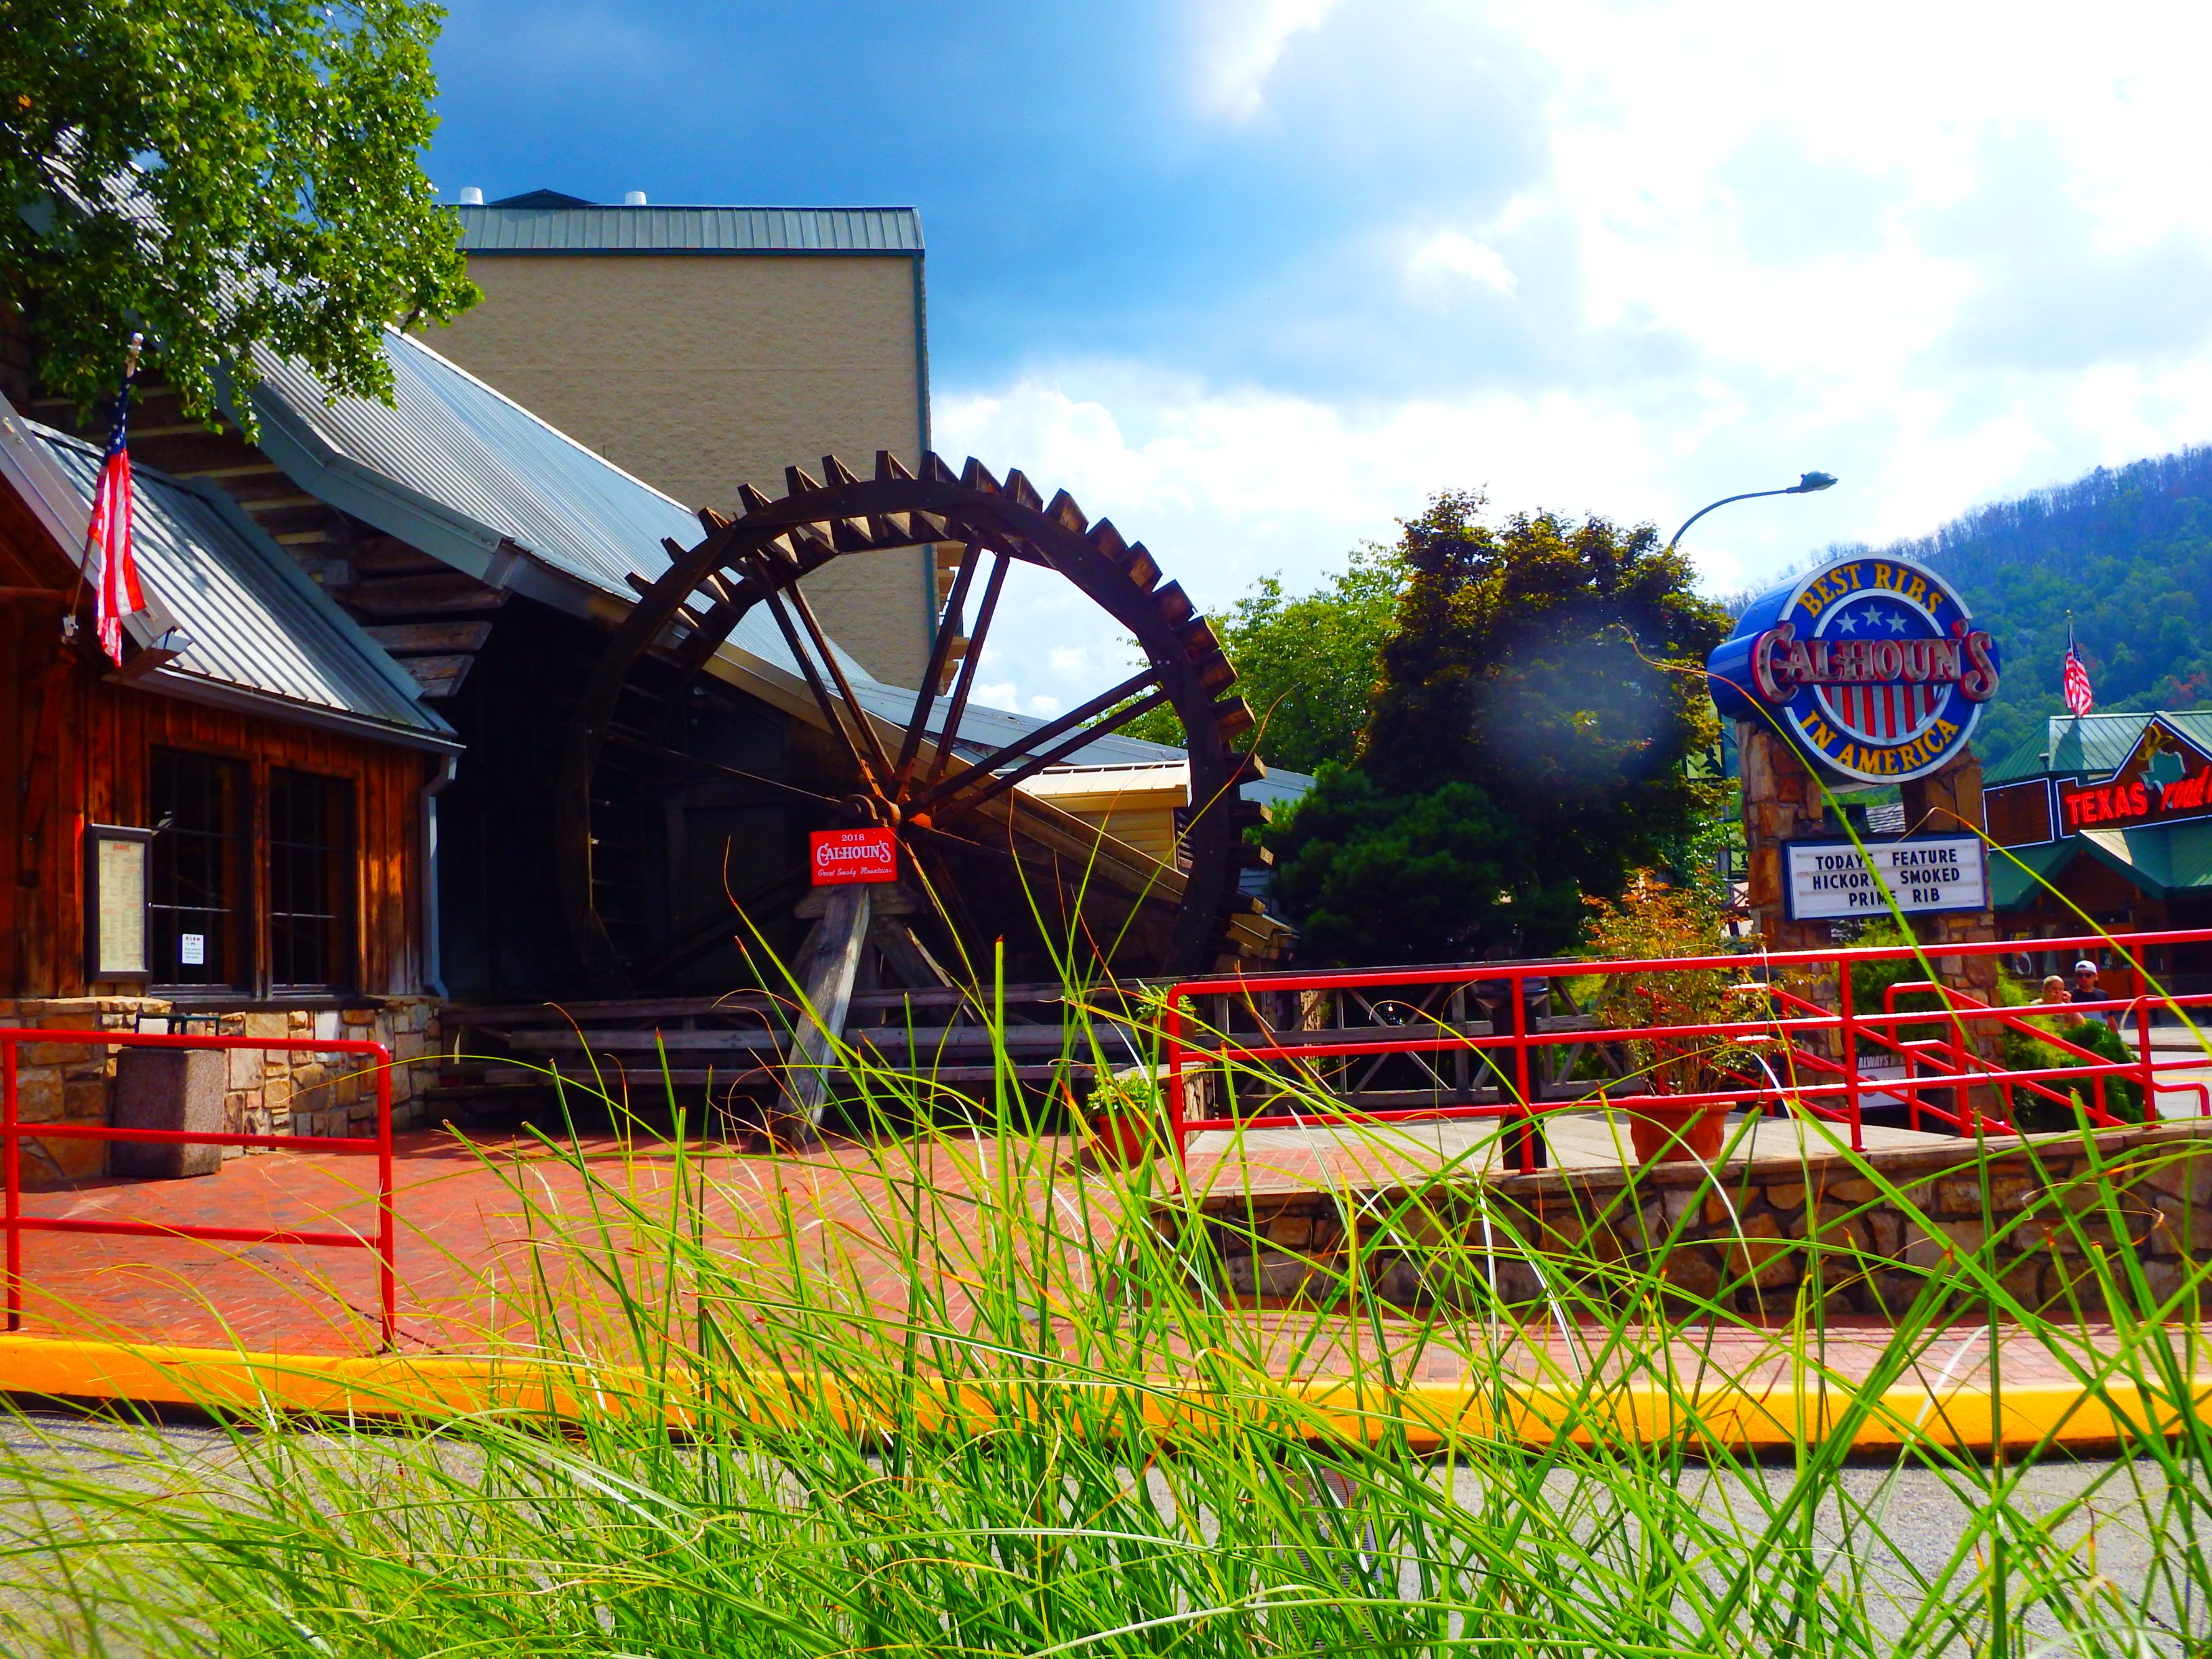 If you want fine dining in Gatlinburg Calhouns has delicious cuisine every day of the week!